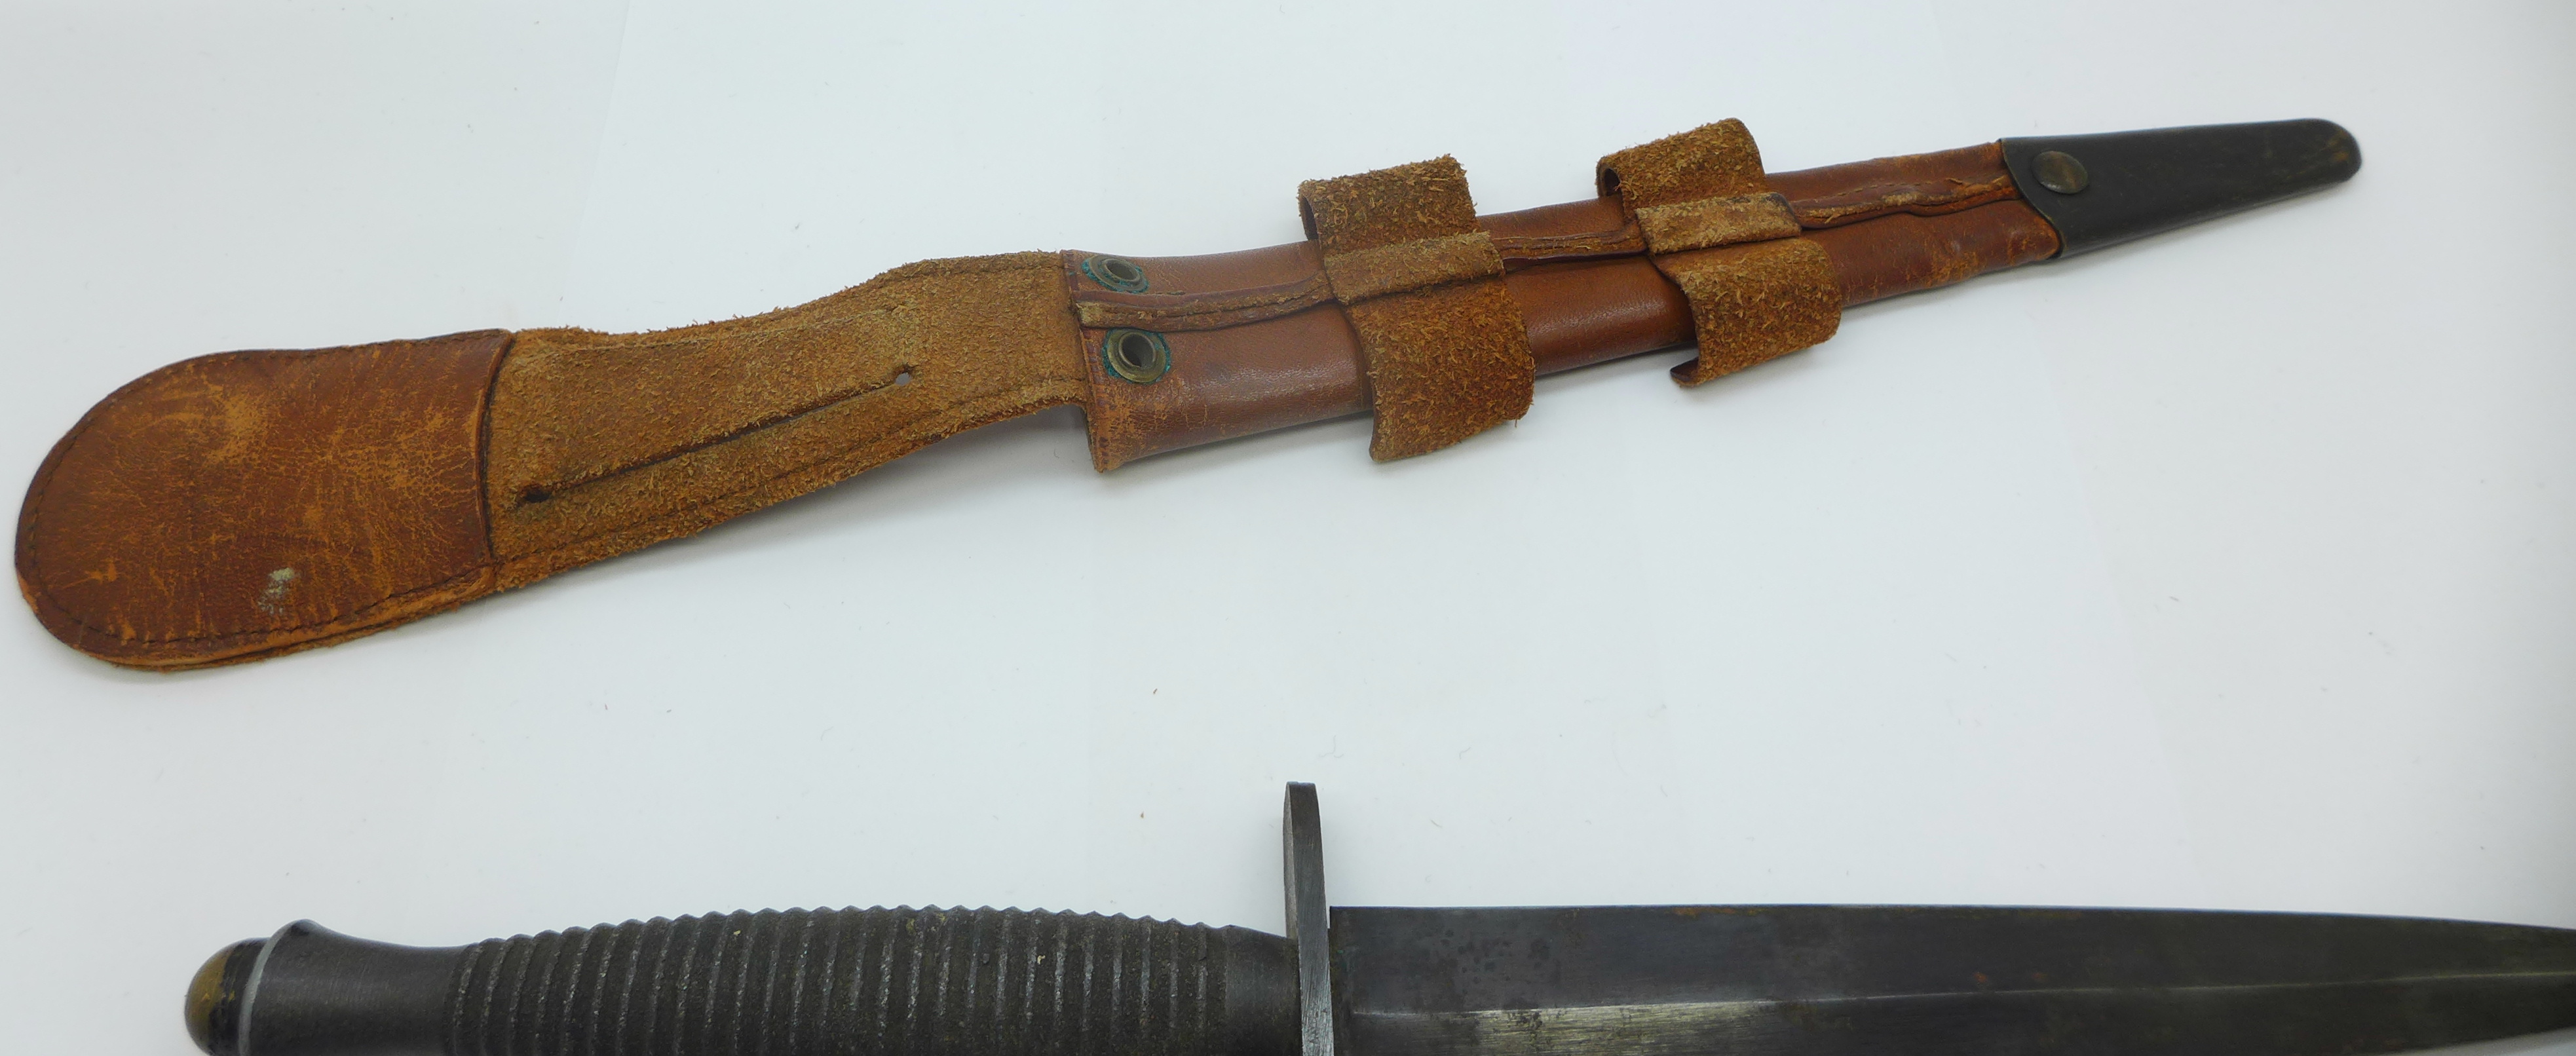 A commando knife with scabbard, tip of blade a/f - Image 4 of 4